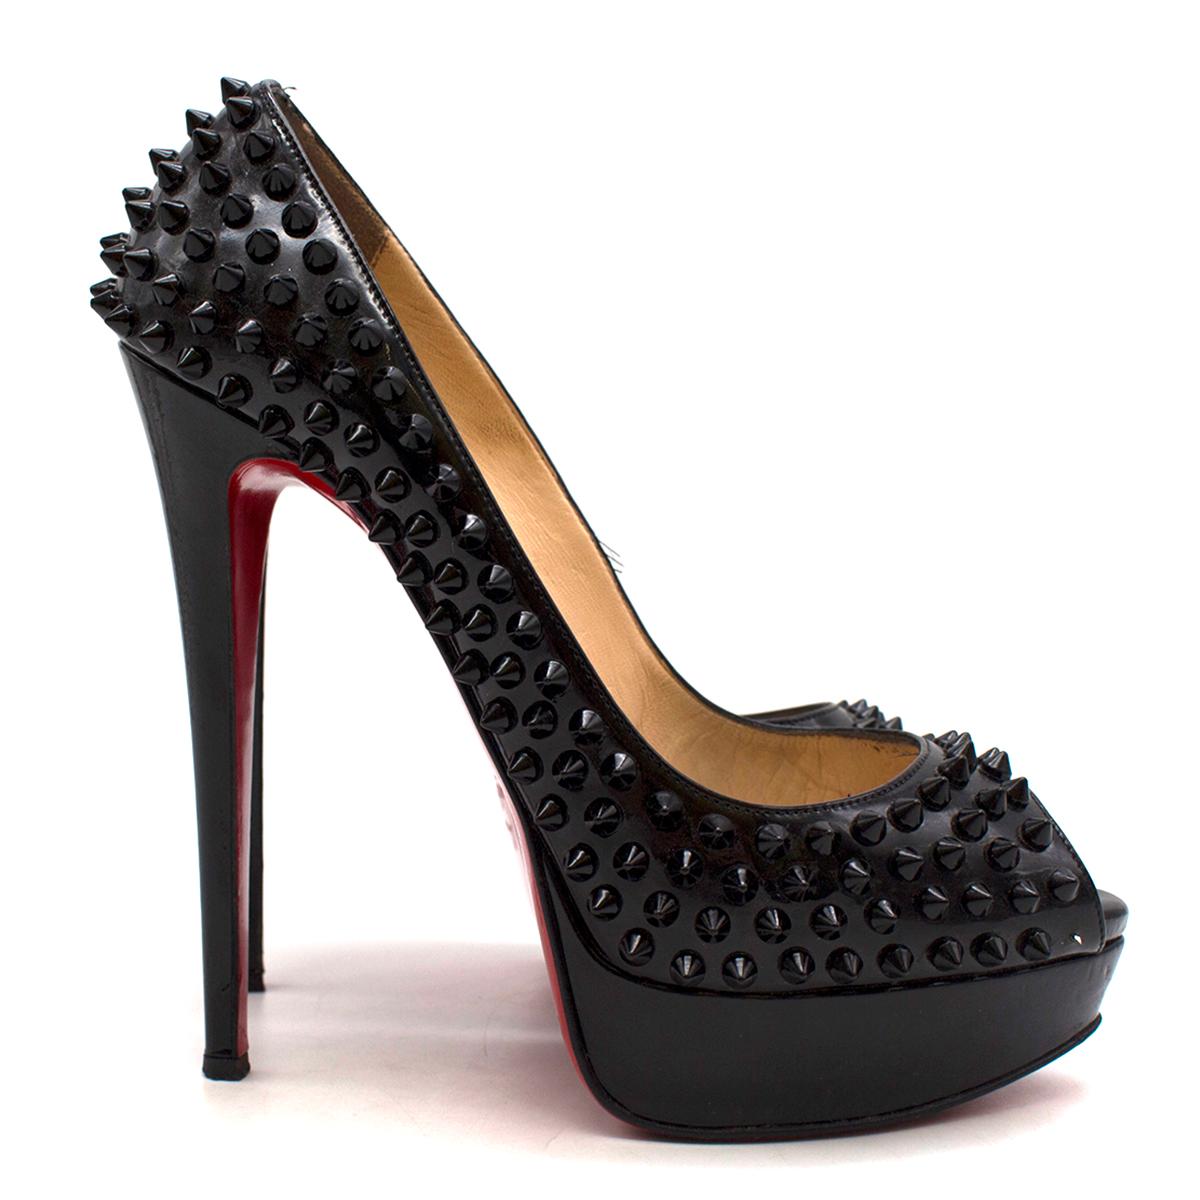 Christian Louboutin Lady Peep Spikes 145mm leather pumps

- Black, patent leather
- Peep toe, leather-covered platform and high stiletto heel 
- Black spike embellished
- Nude leather lining and insole 
- Signature red leather sole
- Comes with a